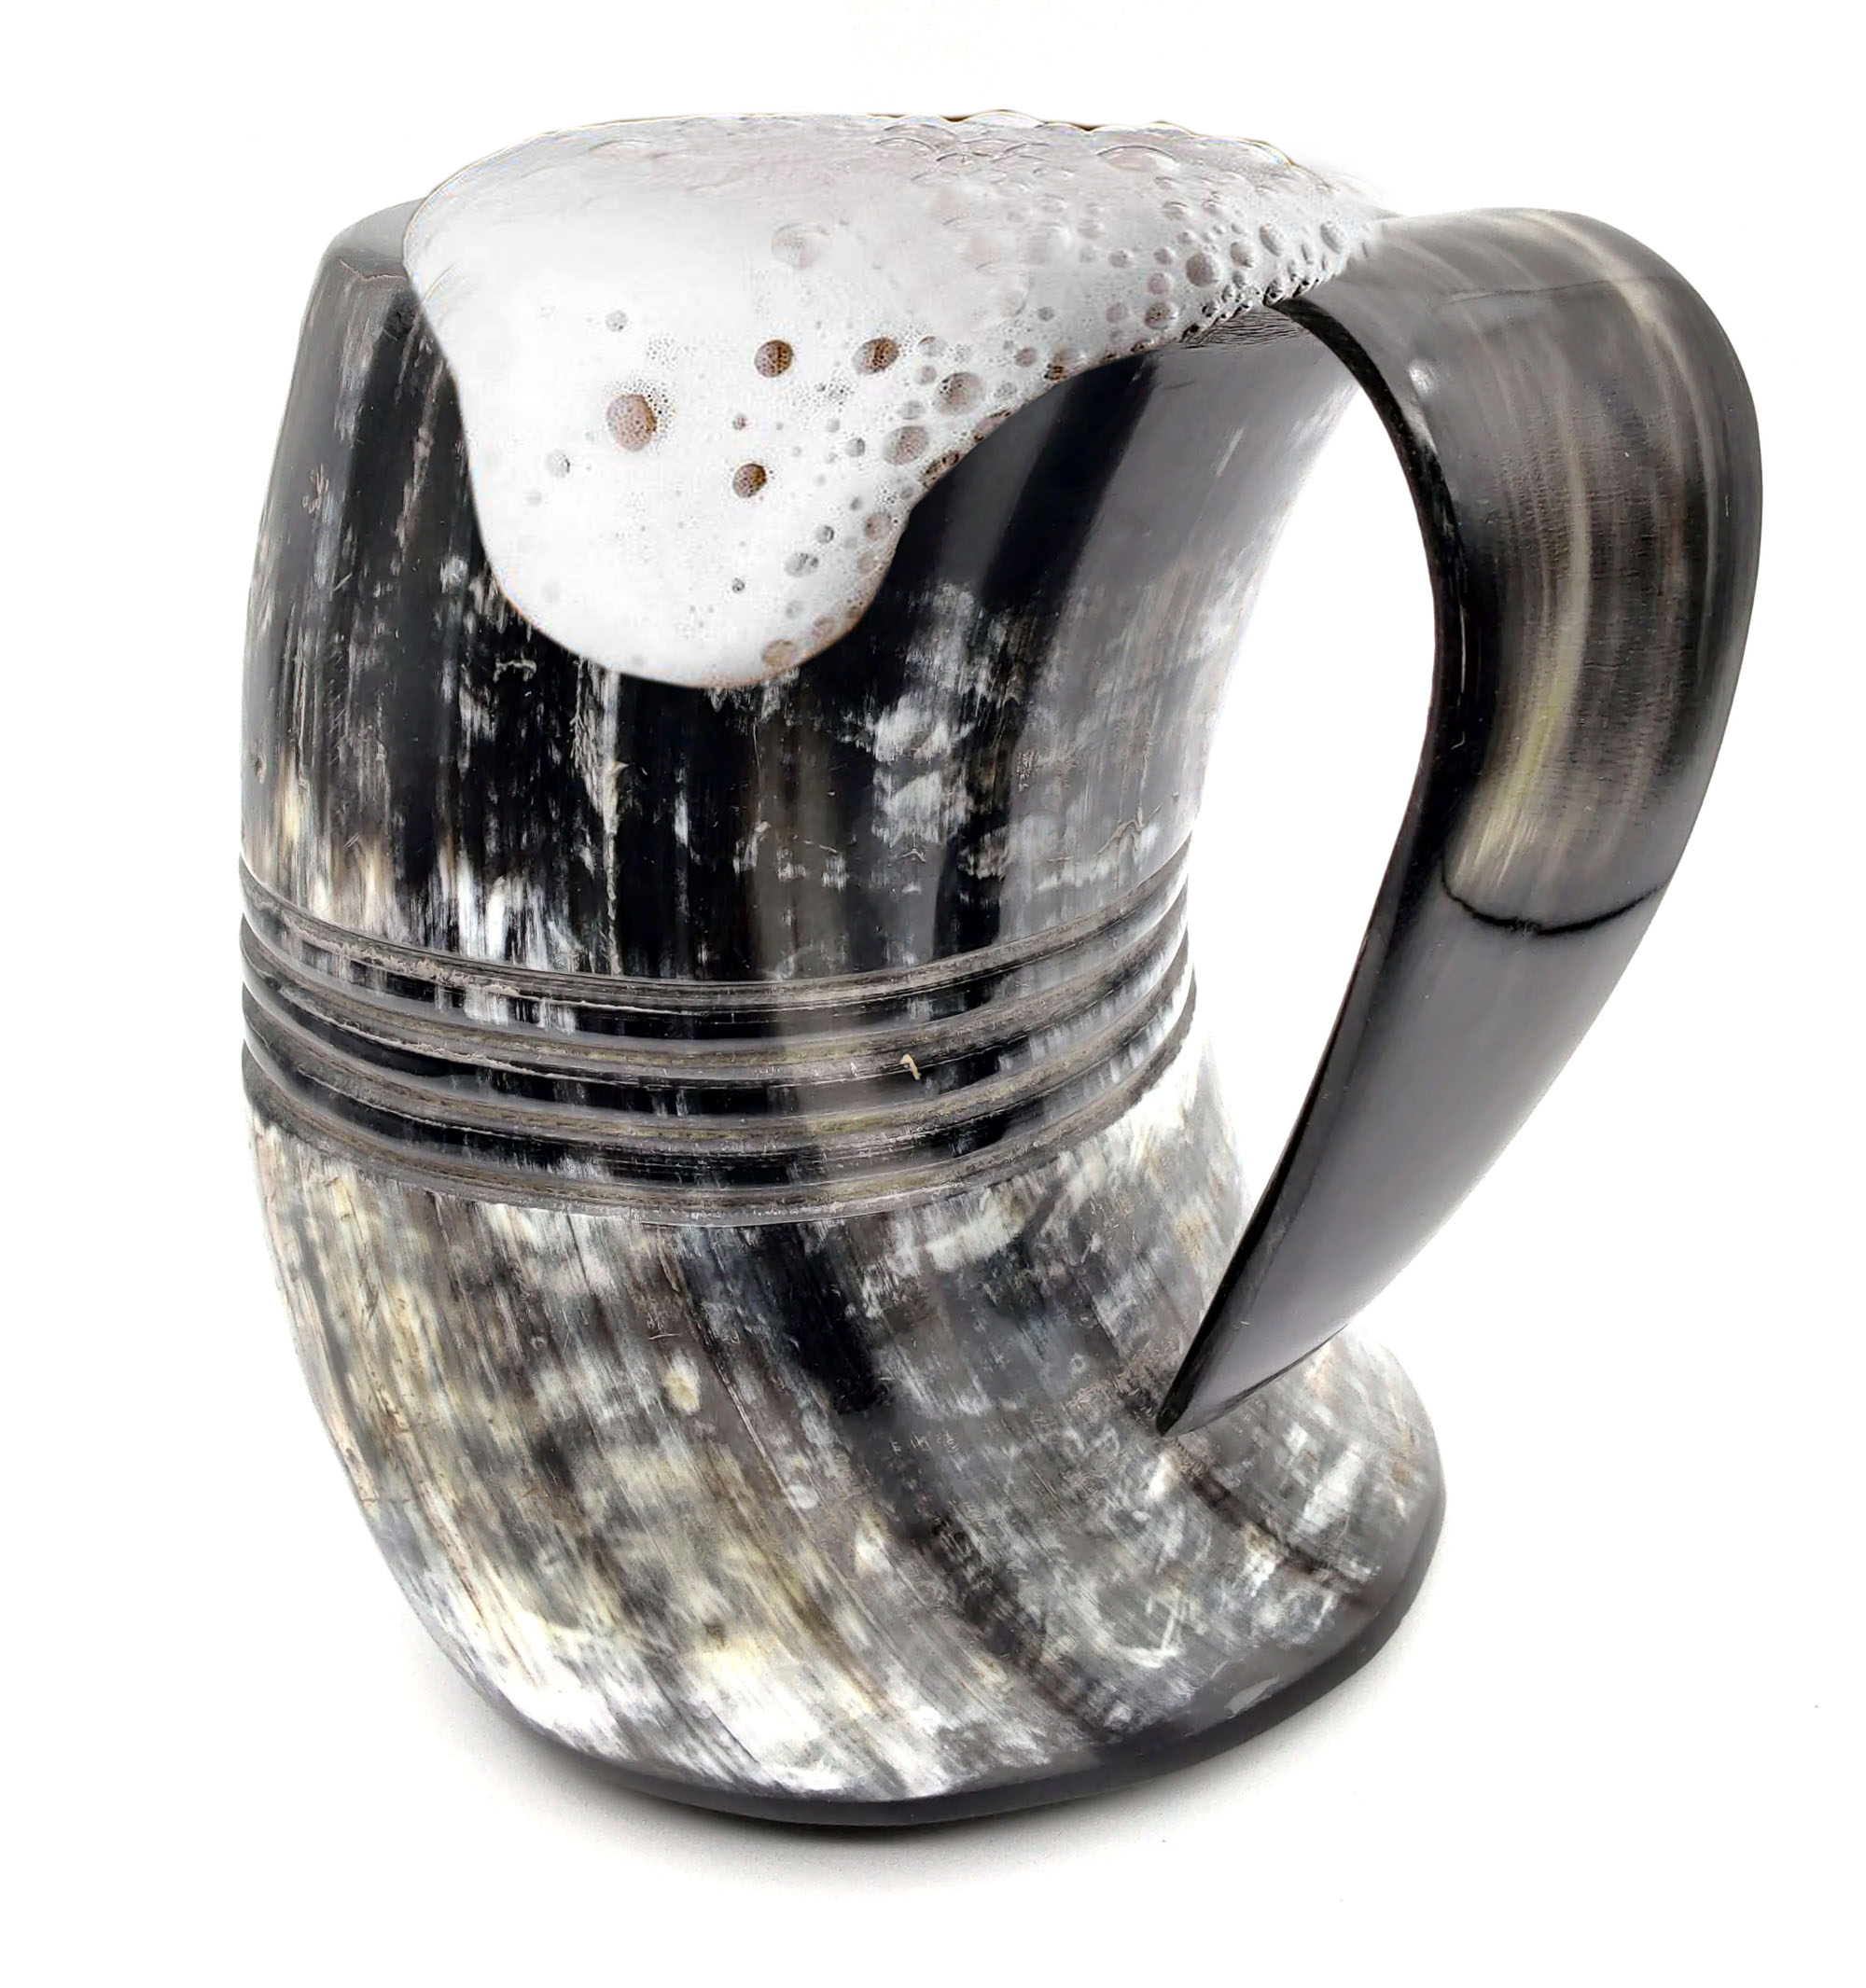 Set of FIVE Game of thrones viking drinking horn mugs cups for beer ale wine 